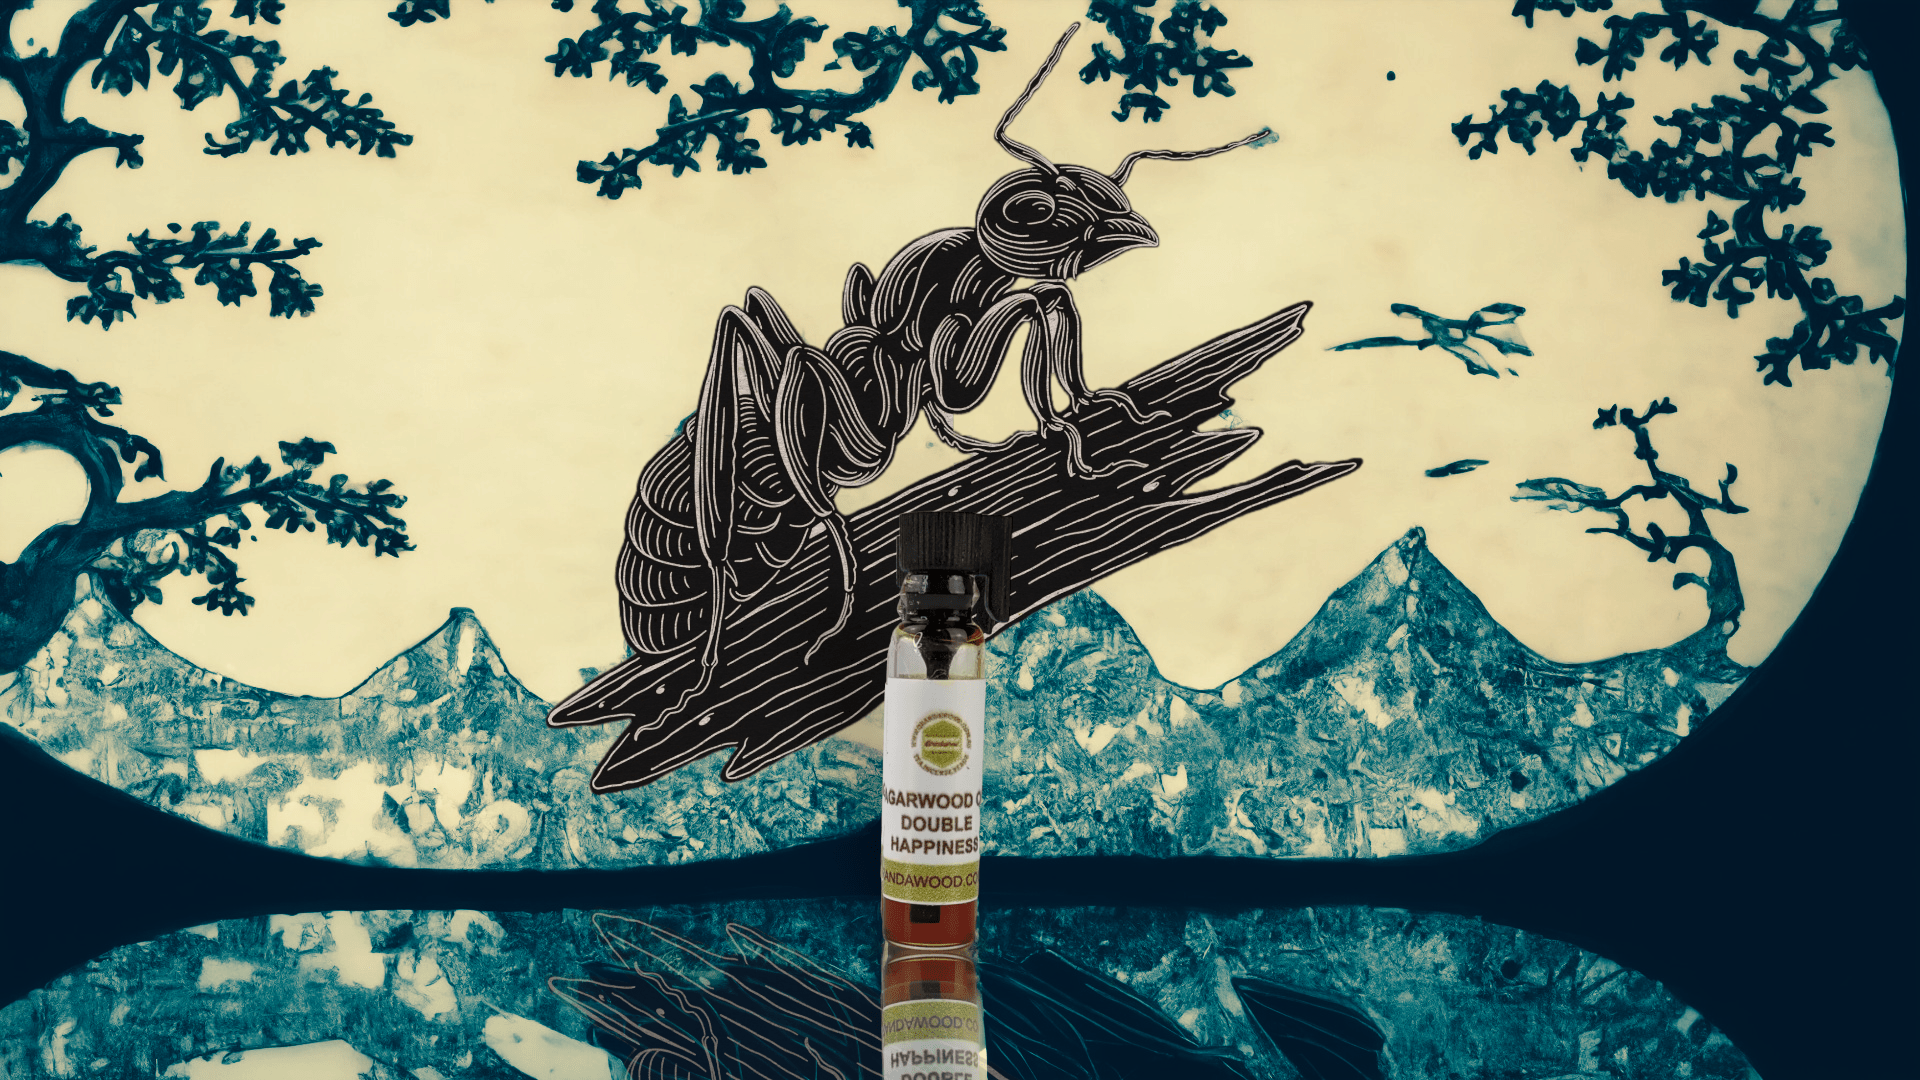 *New* The Heaven Smoke- 100% Pure Cutlivated Agarwood Oil (Oud)- Co2 Supercritical Fluid Extraction - Double Happiness- Cultivated Agarwood / 0.5g